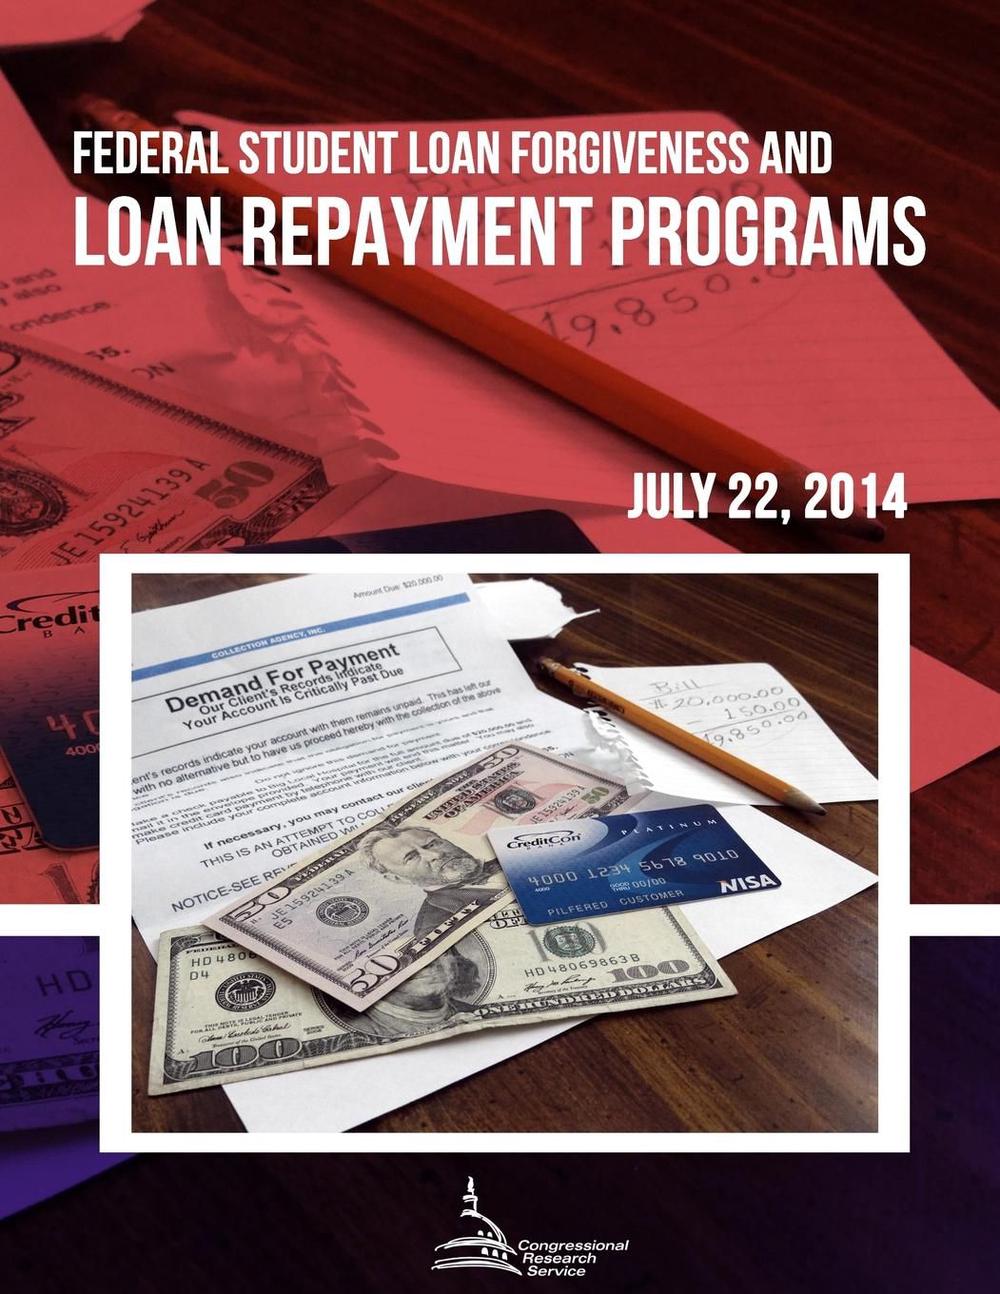 Federal Student Loan and Loan Repayment Programs by